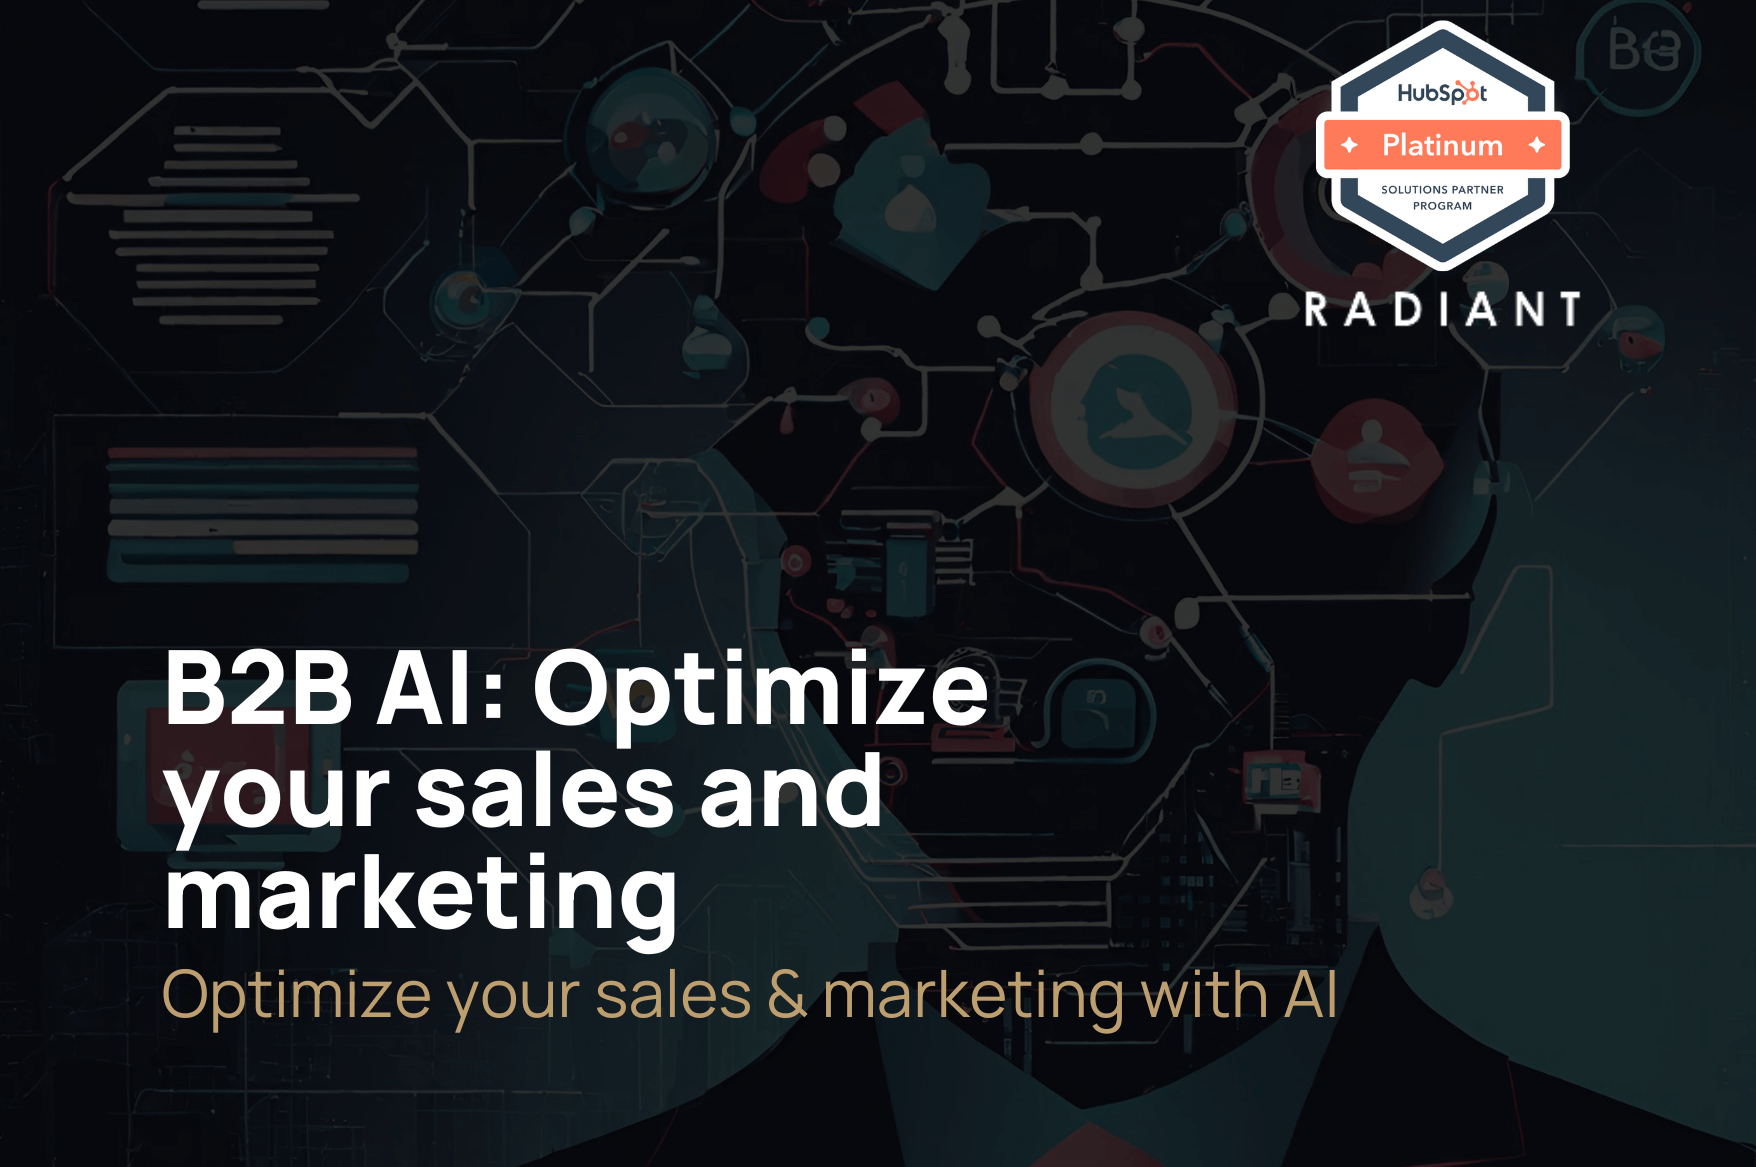 B2B AI: Optimize your sales and marketing